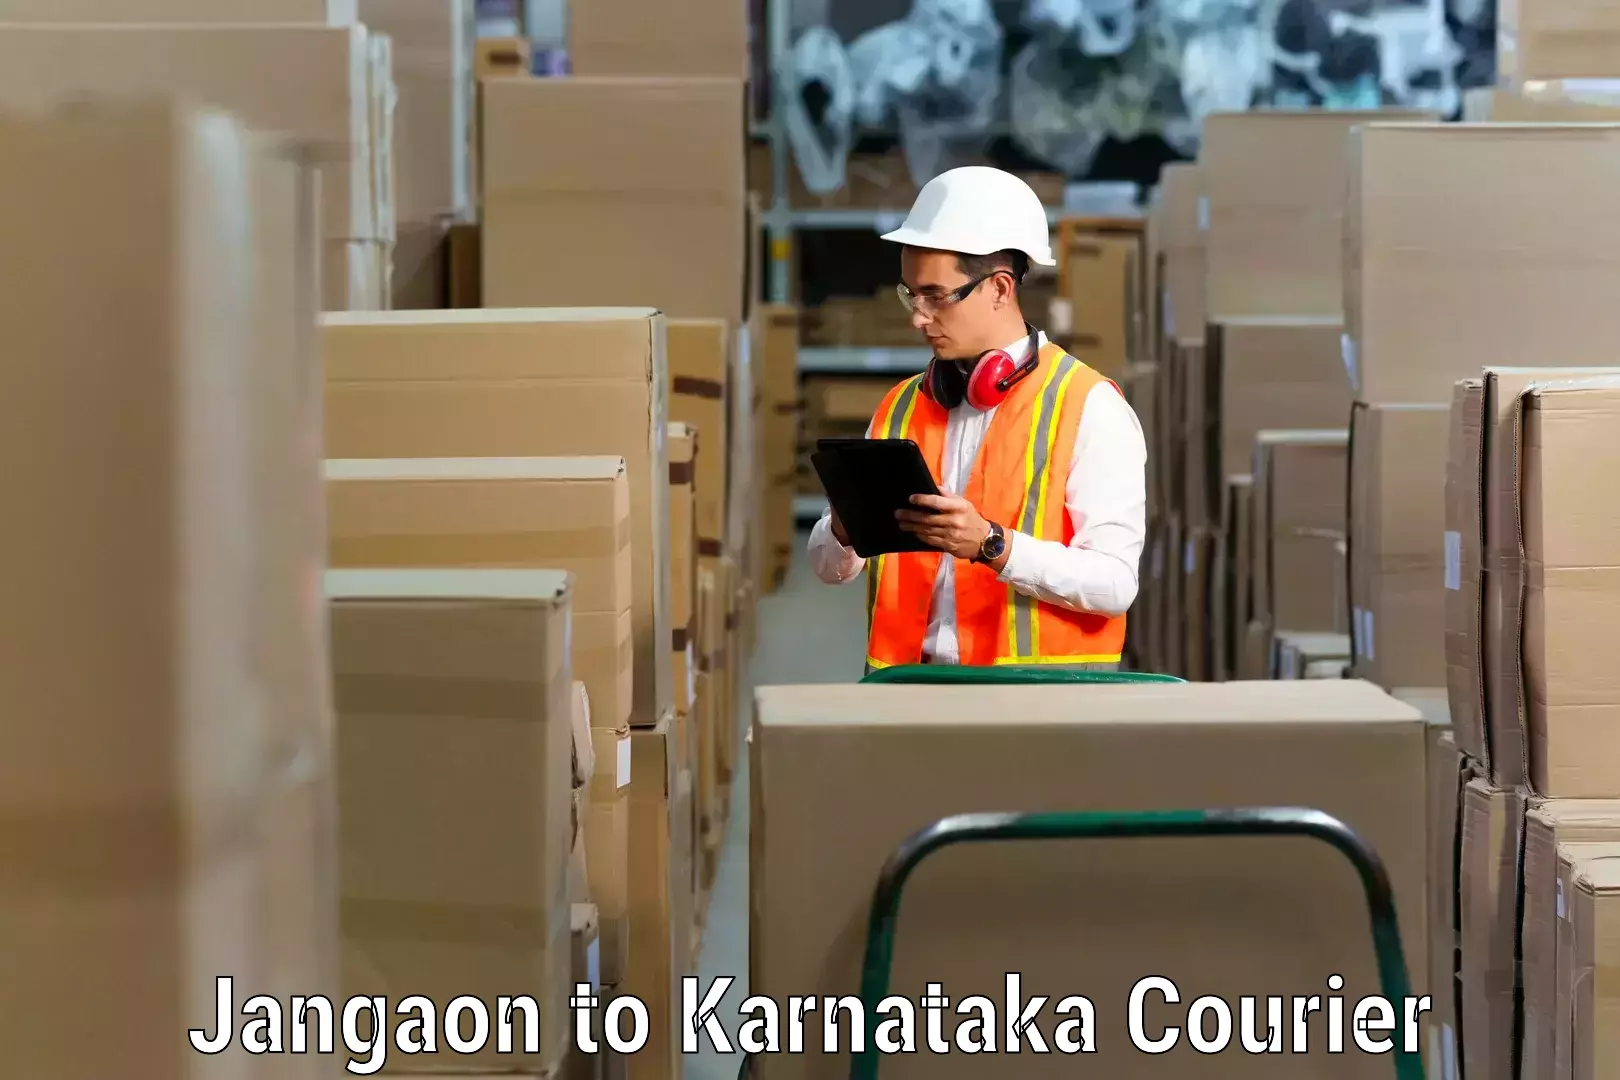 Quality relocation services in Jangaon to Yelburga